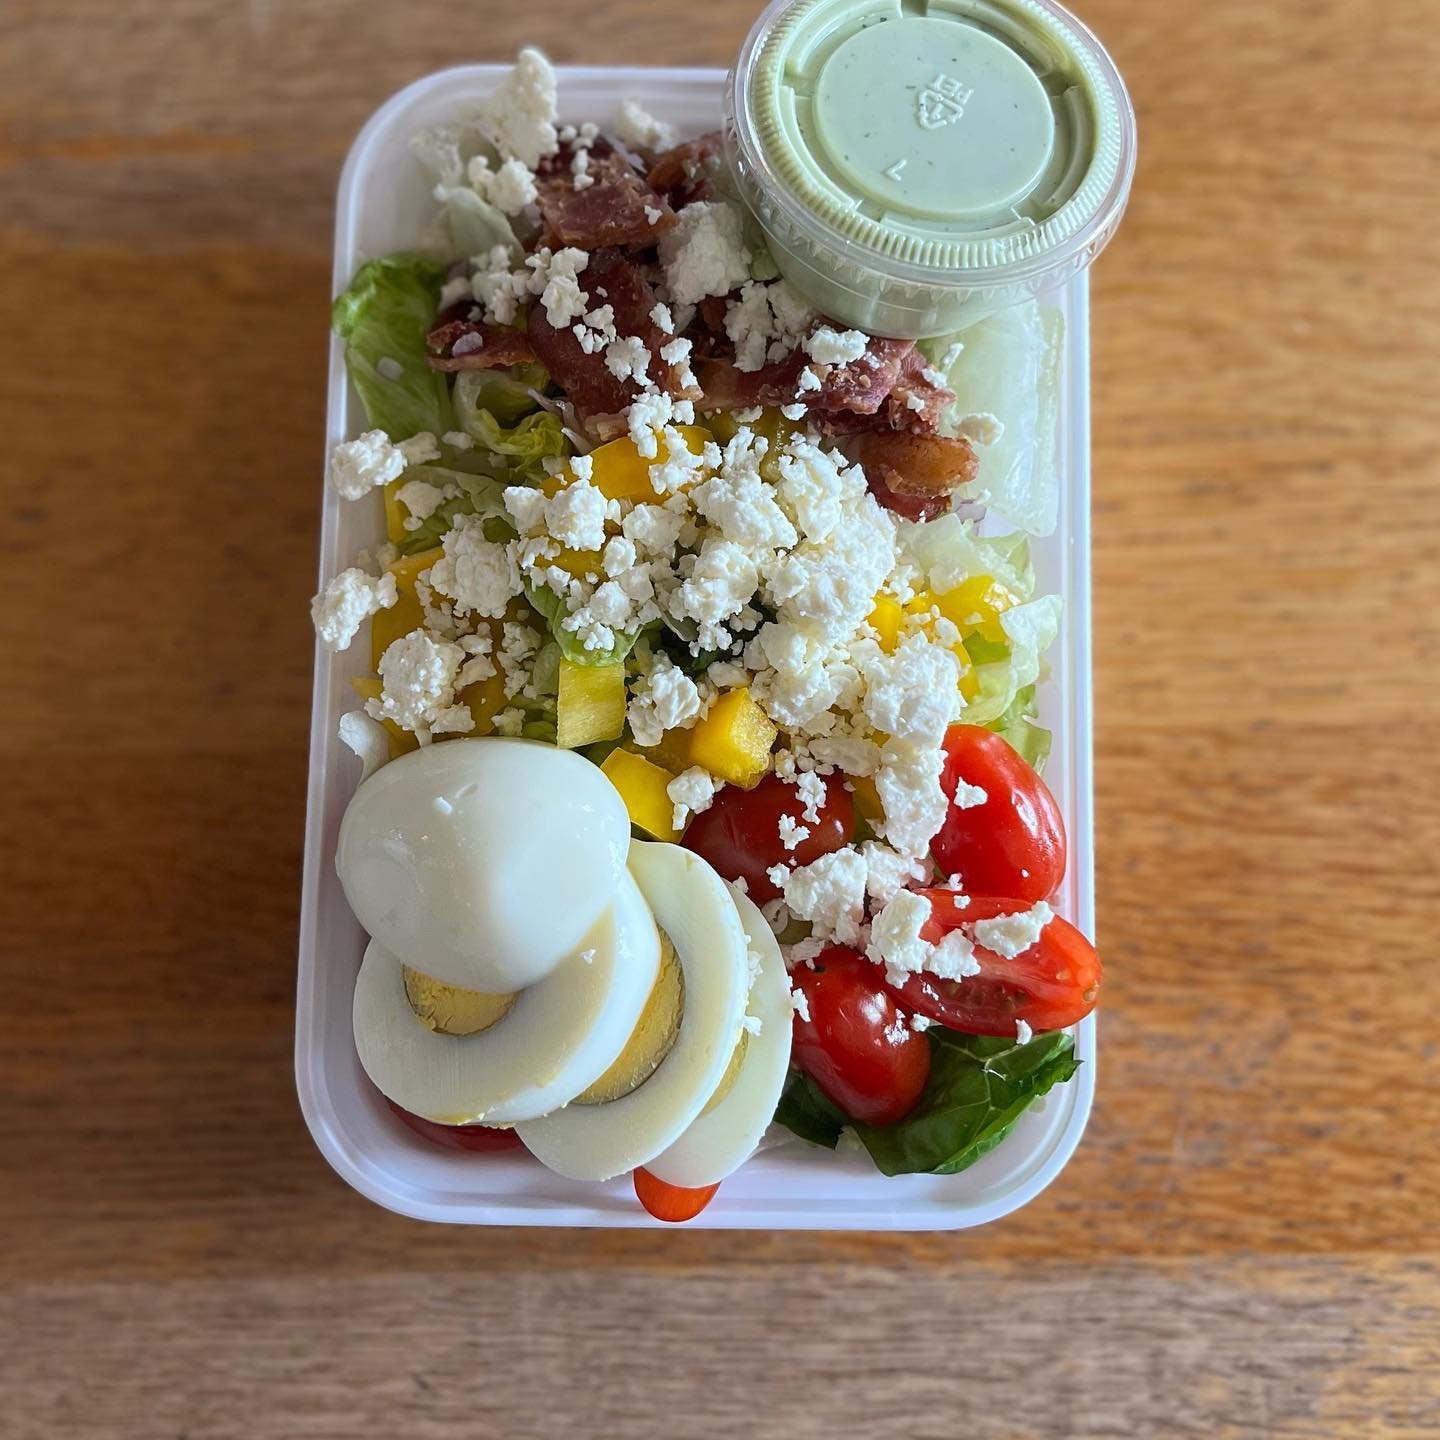 Our feature this week is a Cobb salad with a homemade creamy lemon basil dressing! Available as a grab n go, if you&rsquo;re on the run!!

#alamodecafe #draytoncoffeeshop&nbsp;&nbsp;#drayton #drayonON #draytonentertainment #mapletontownship #elmira #